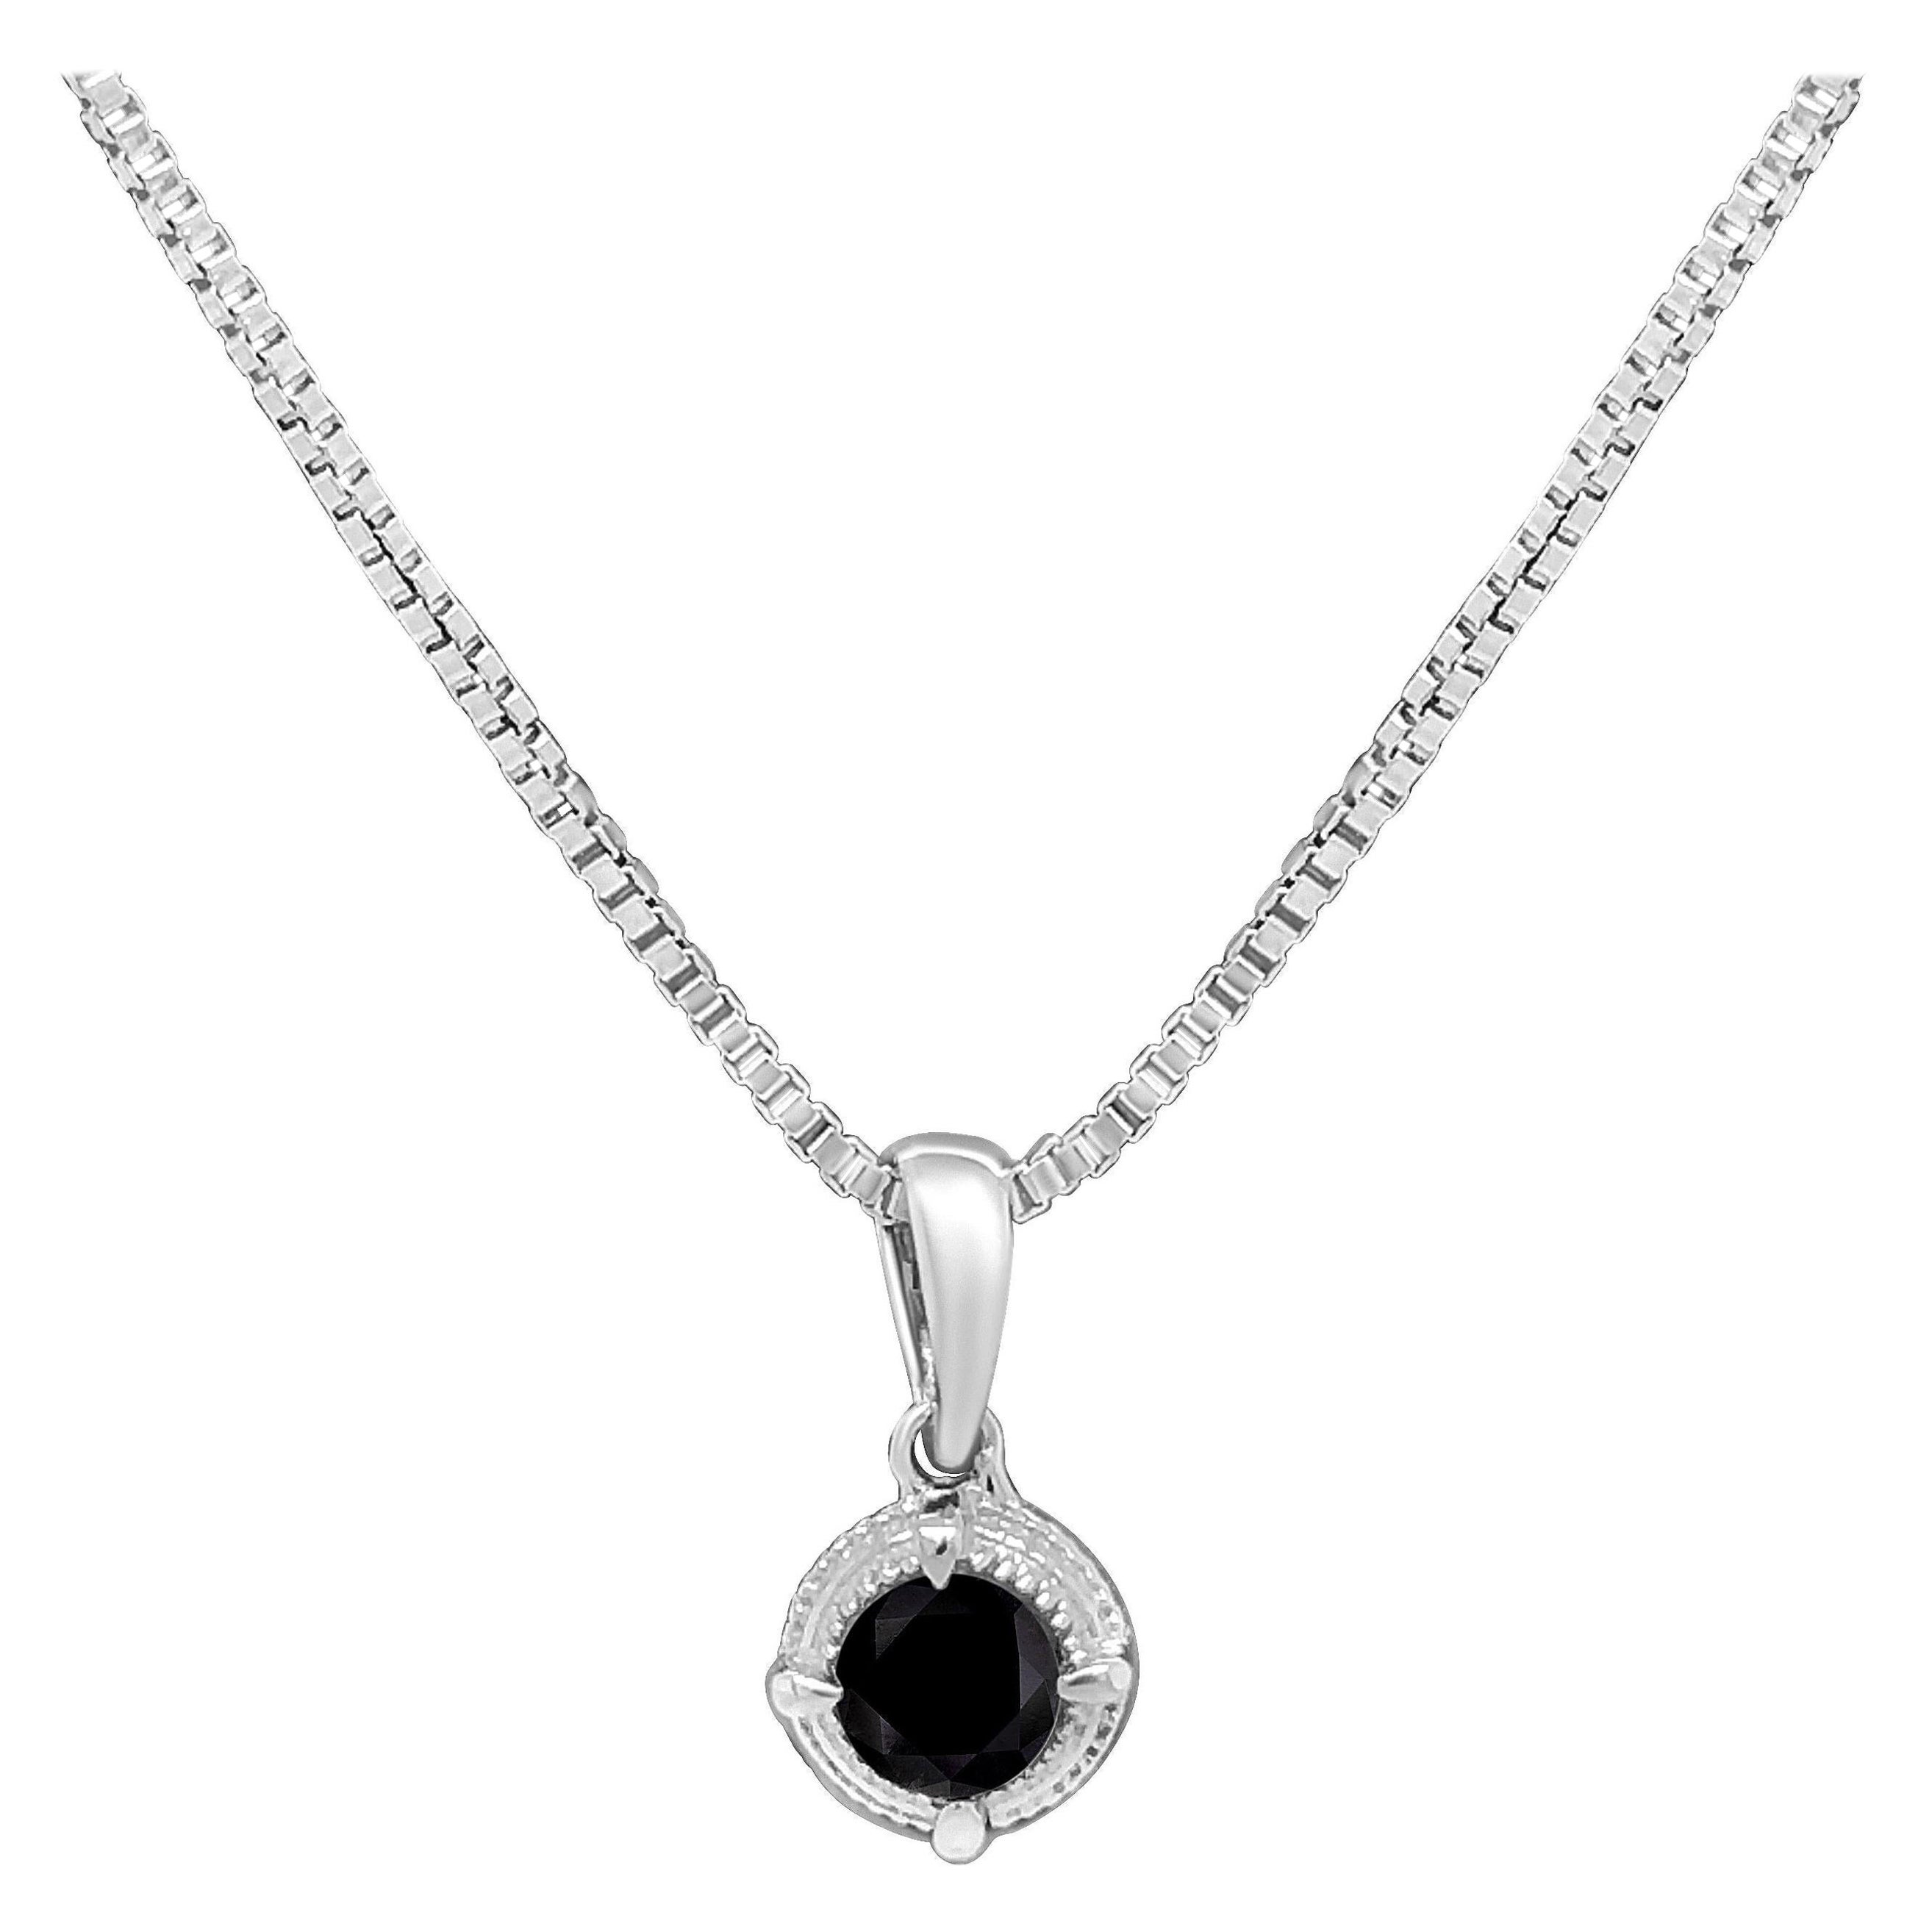 .925 Sterling Silver 1/10 Carat Treated Black Diamond Solitaire Pendant Necklace